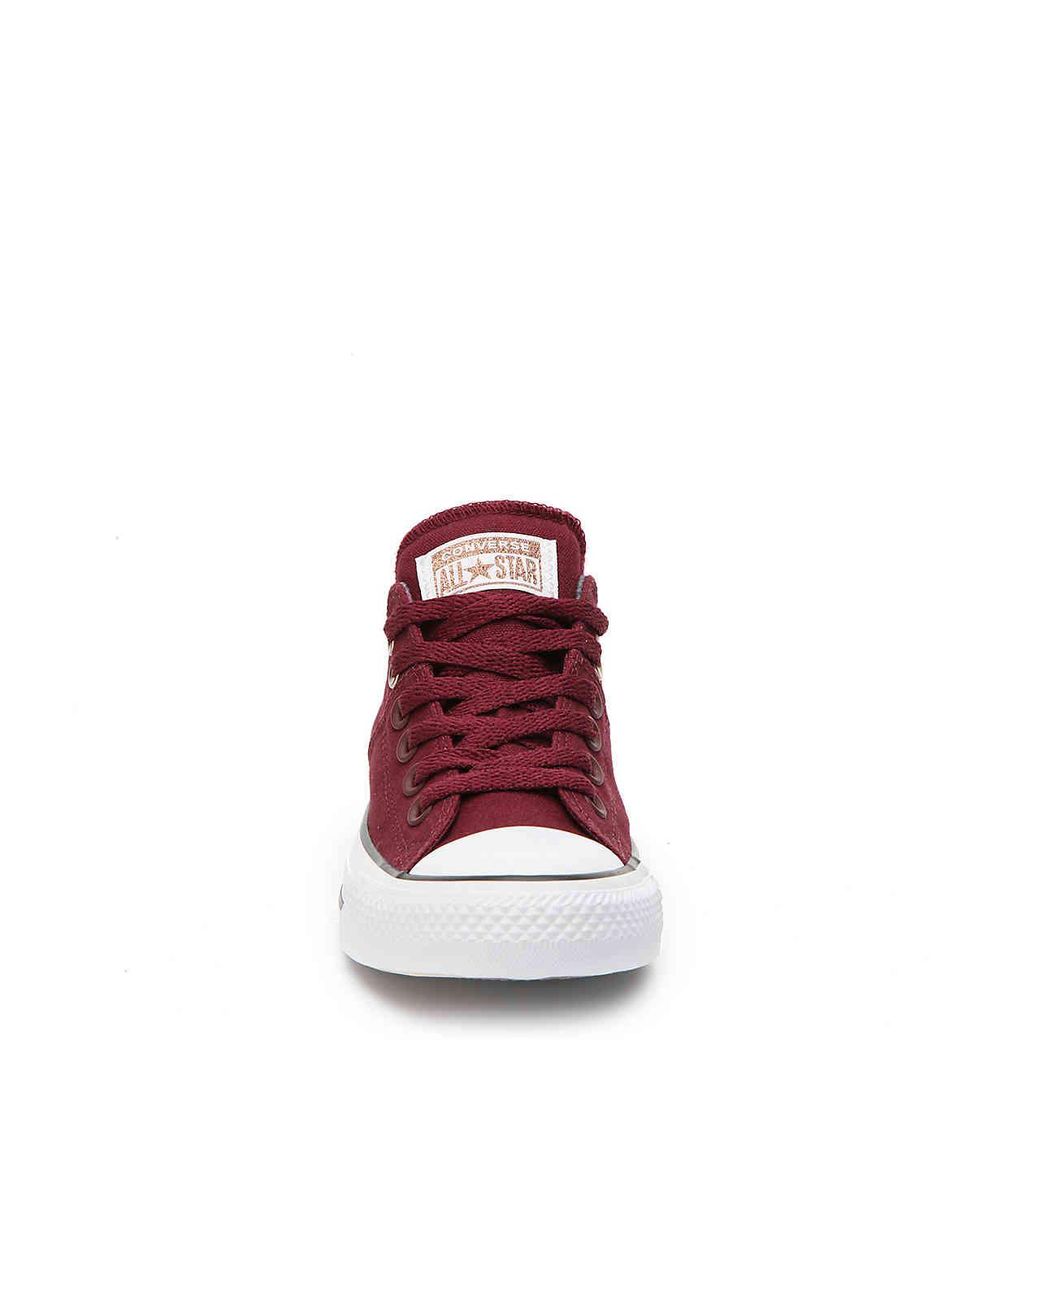 Converse Chuck Taylor All Star Madison Sneaker in Red | Lyst